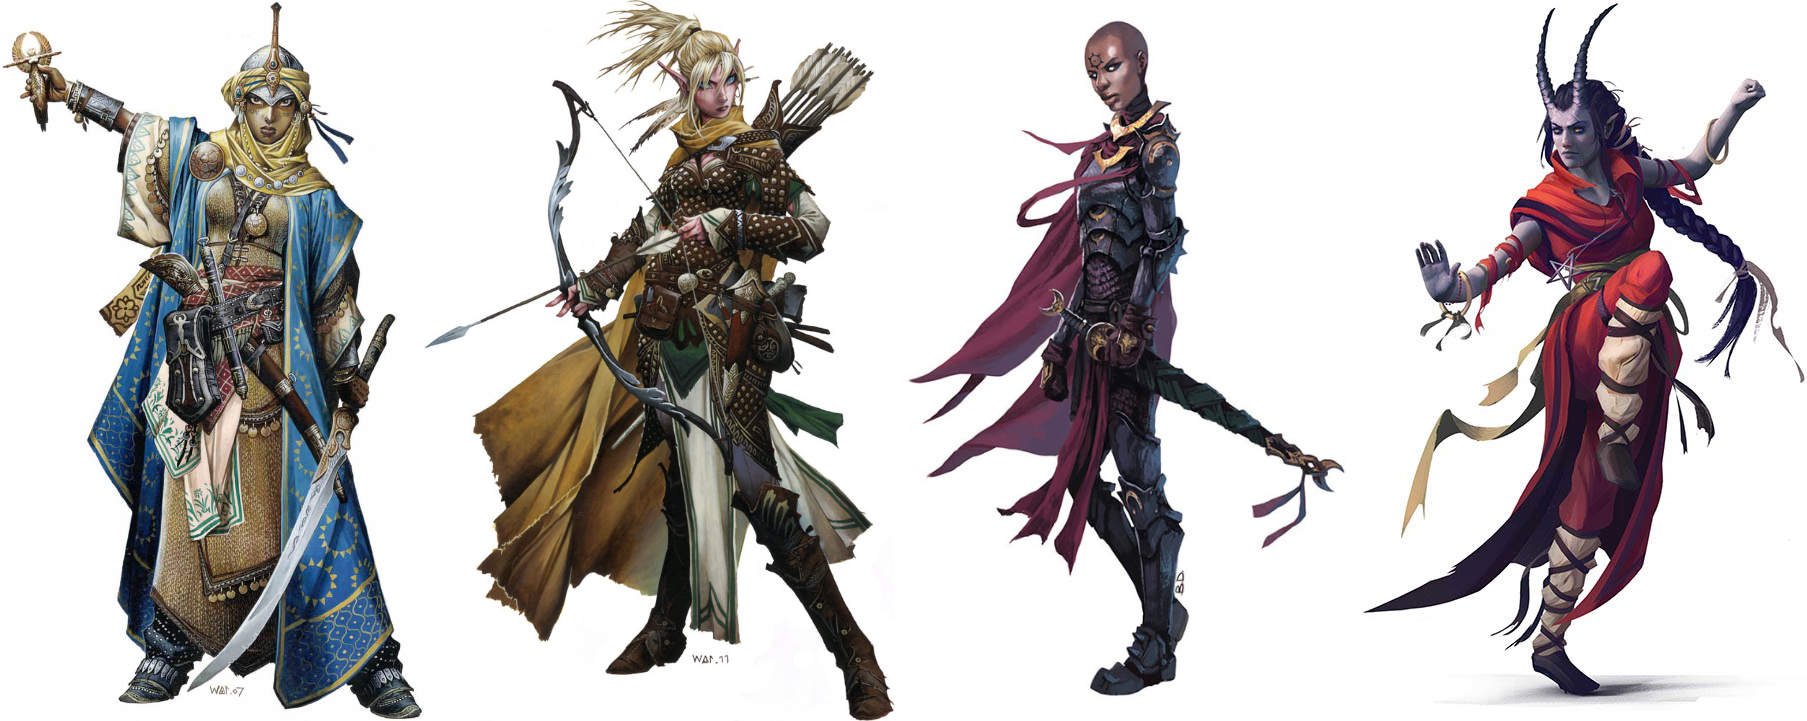 4 illustrations of women from paizo. the first is a cleric wering many robes, carring a scimatar, and a holy symbol. The only skin you can see is her face and hands. You can see the shape of breasts, but they are in no way emphasized. The second is a ranger wearing studded leather armor and holding a bow. The visible skin is on face, and hands, as well as a tiny bit of chest skin but no cleavage is visible, and the breats aren't emphasized. The third is a person who is either female or non-binary, and completely covered in armor. They are staring daggers at the viewer. The fourth  is a tiefling. Their clothes are open at the chest but while they do show chest skin they stop before displaying cleavage. The skin of their arms and face is visible and they are holding a martial arts pose with both arms and one leg raised.